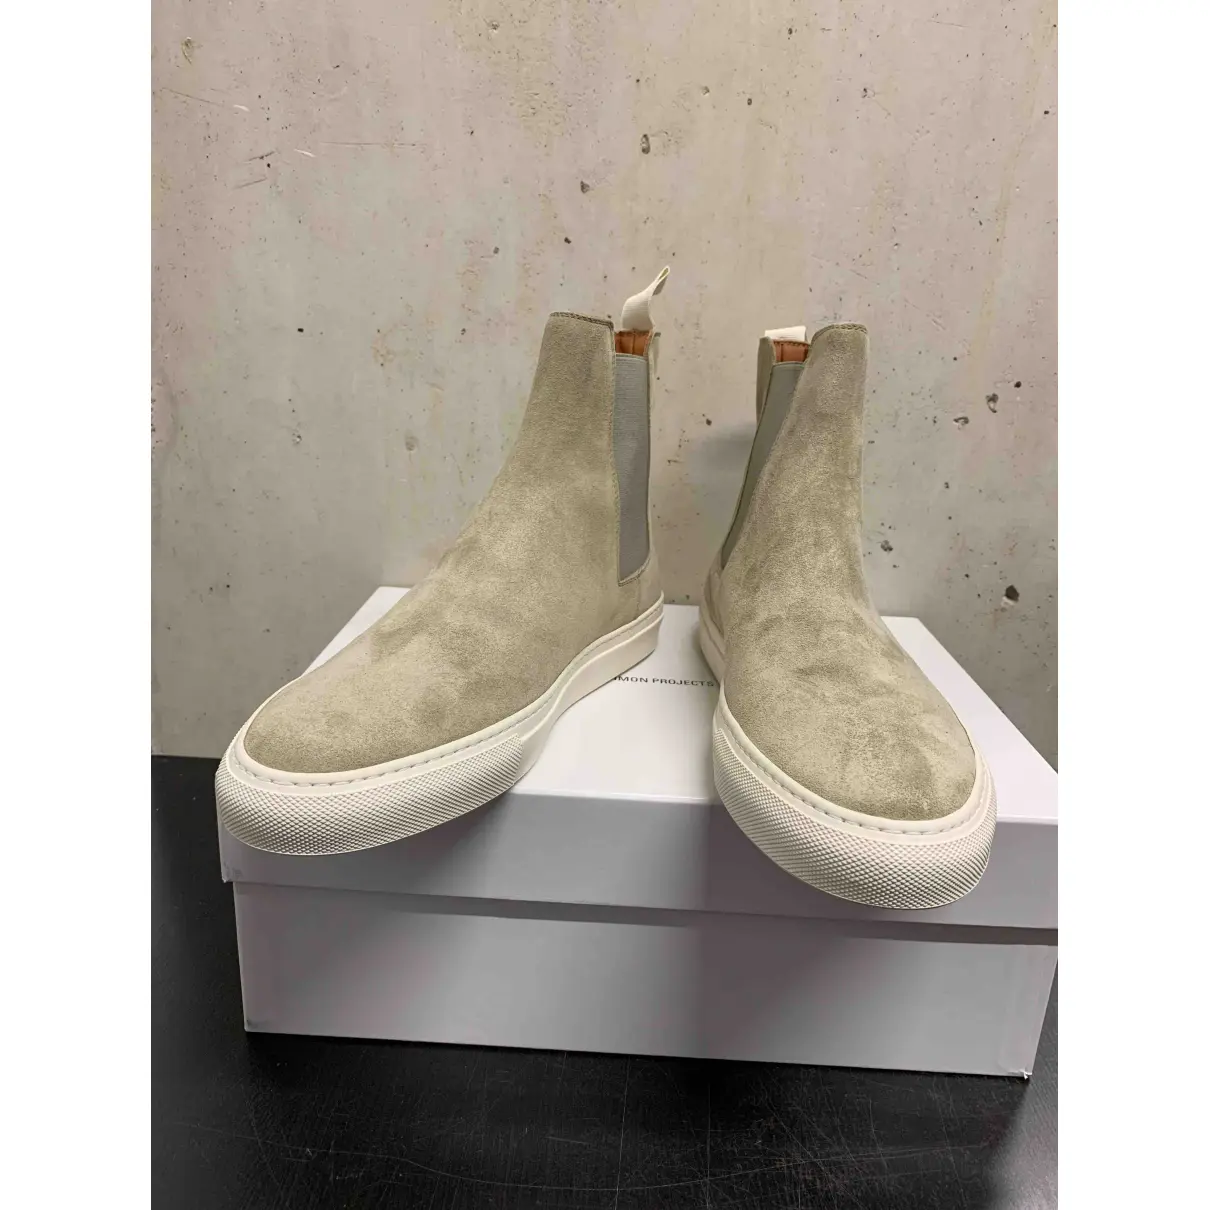 Buy Common Projects High trainers online